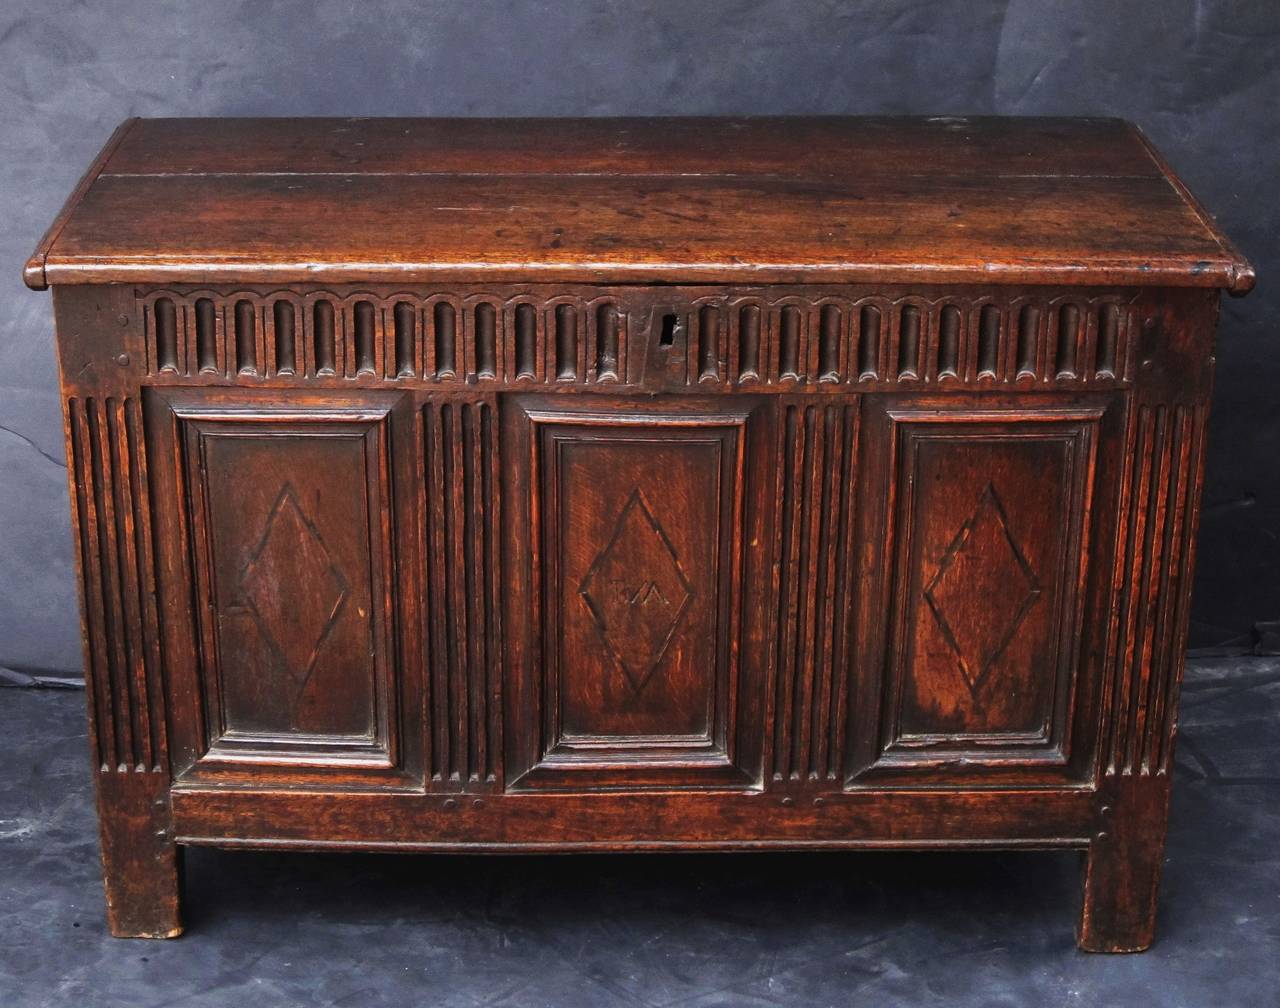 A handsome English panel carved coffer or chest (trunk) of oak from the Jacobean period (King James II), featuring an iron-hinged, panel top, mounted to a joined rectangular base. 

The base with a linen fold pattern along the top face, over three